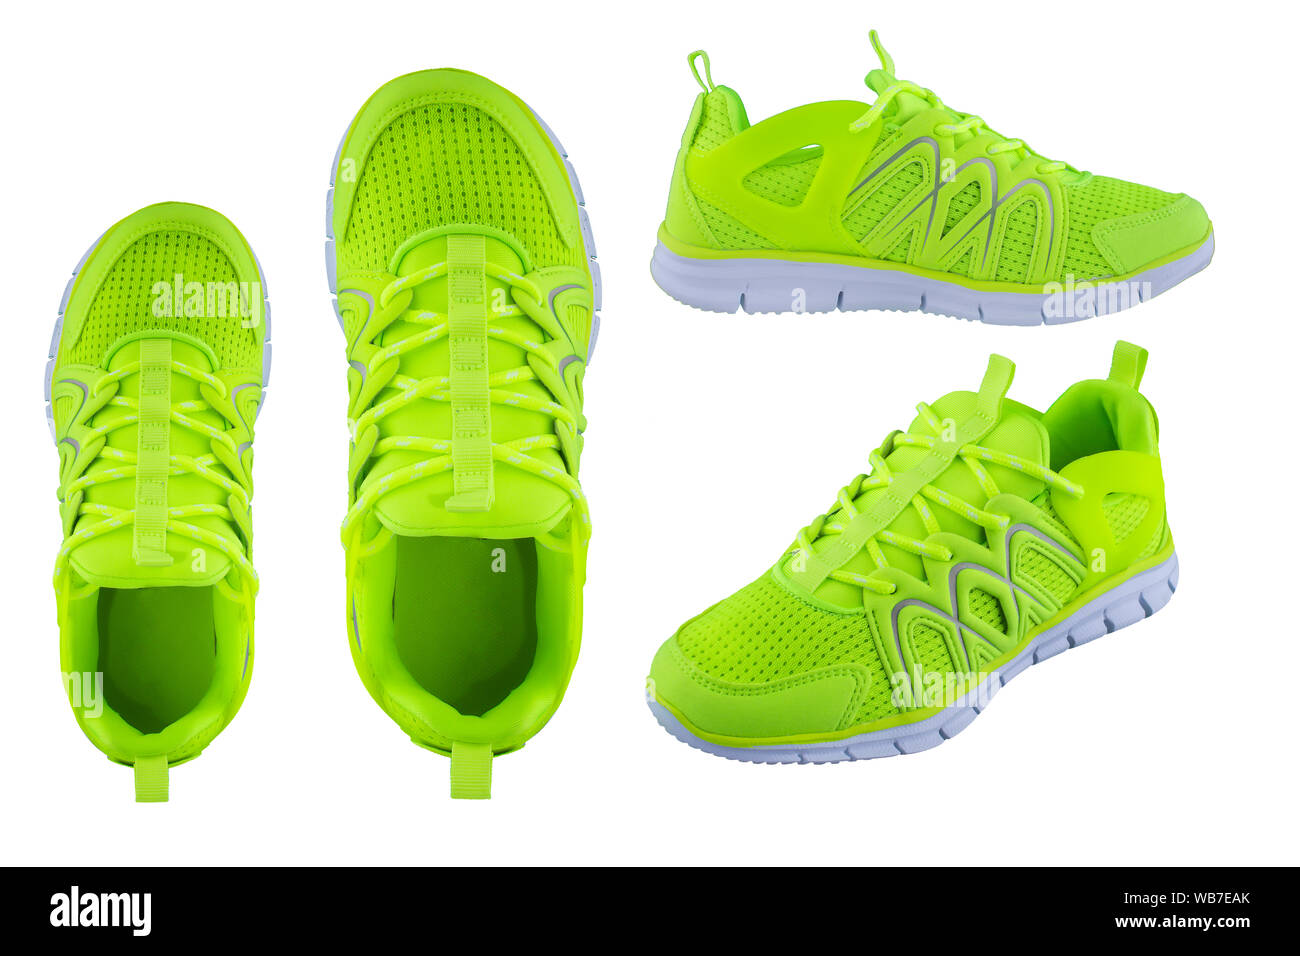 Sneakers bright green.. Sport shoes on 